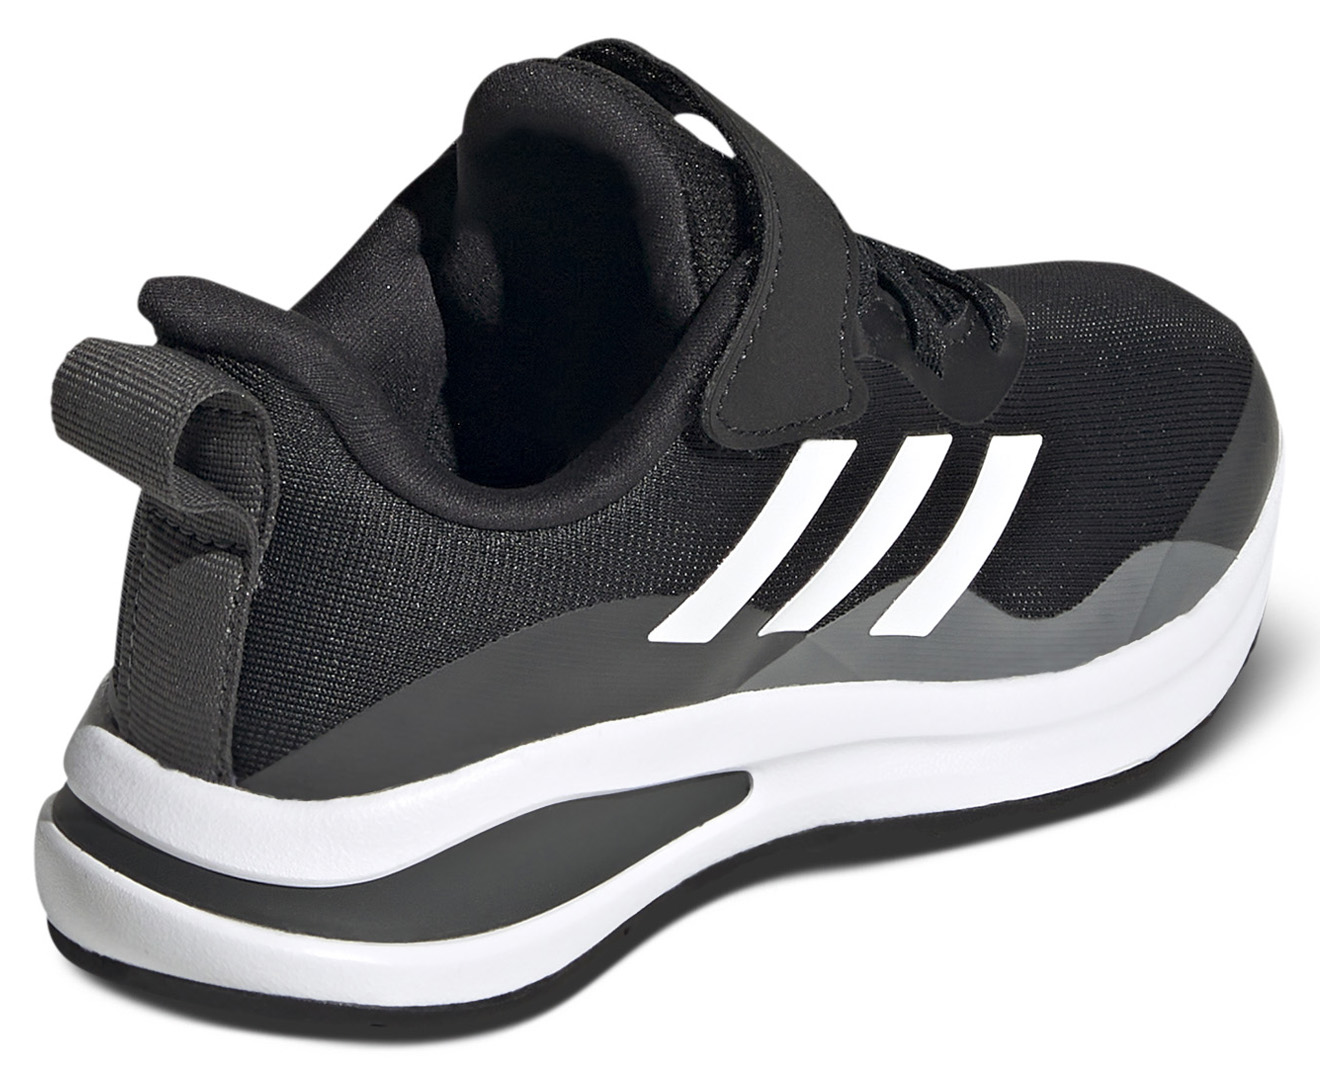 Adidas Kids'/Youth Fortarun Elastic Lace Top Strap Running Shoes ...